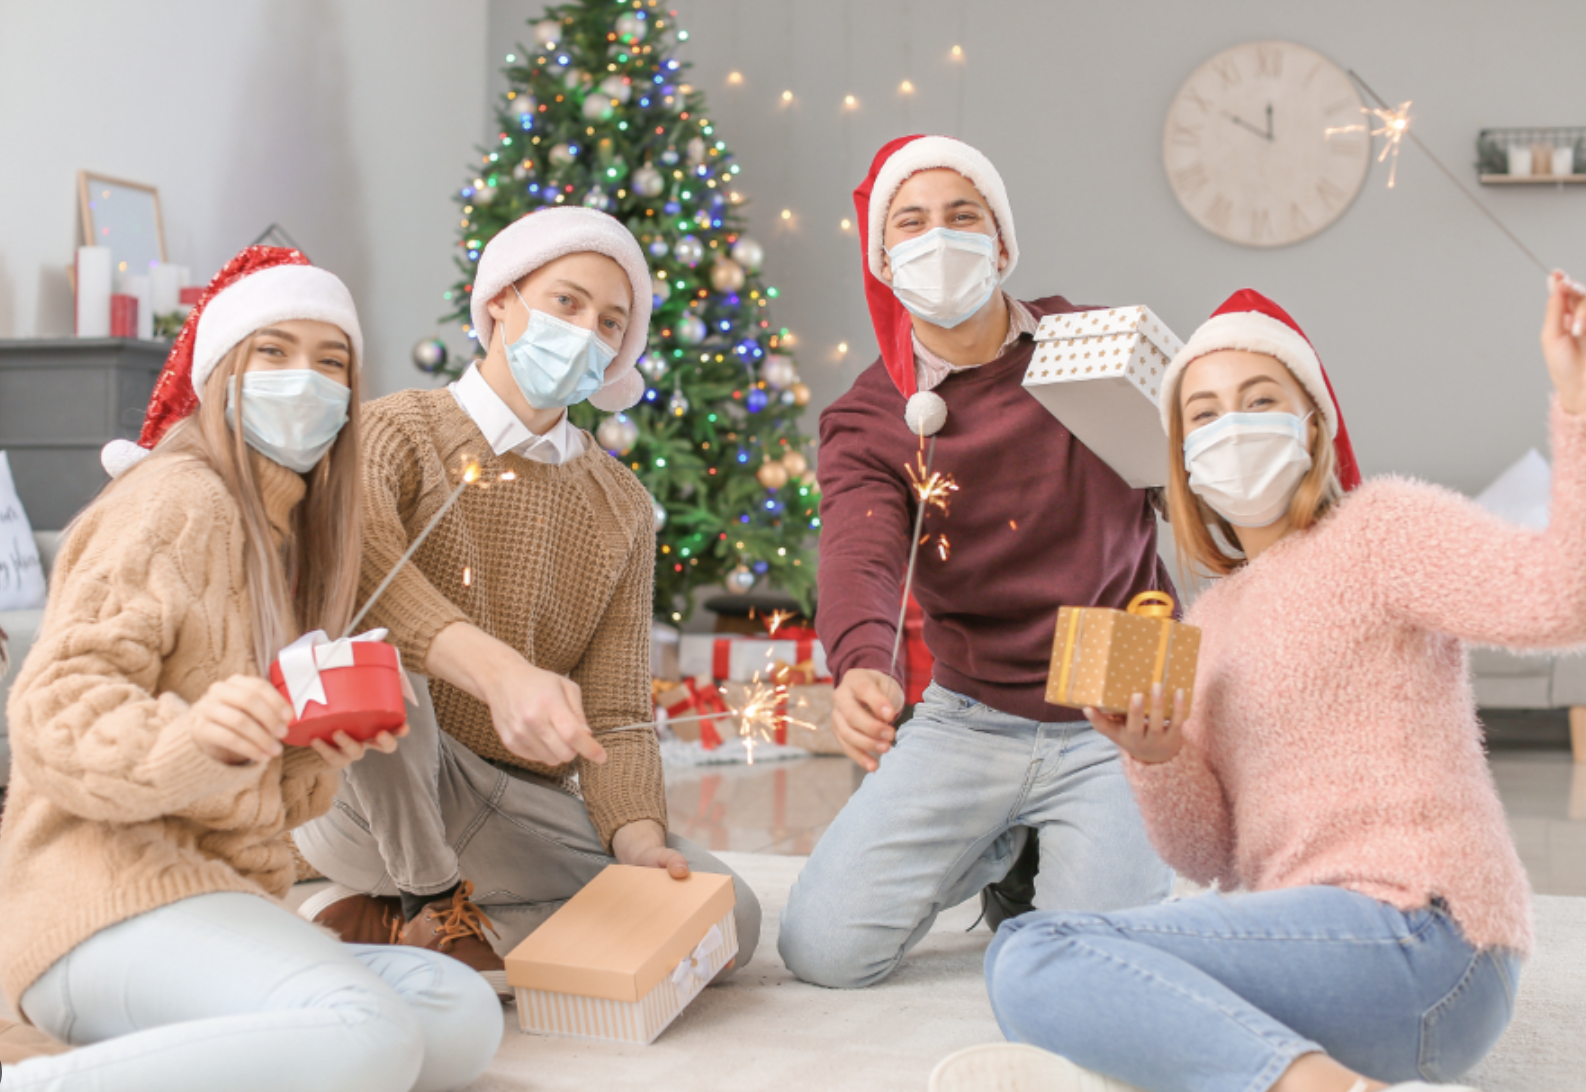 Goverment-compliant subjects wearing masks while exchanging gifts